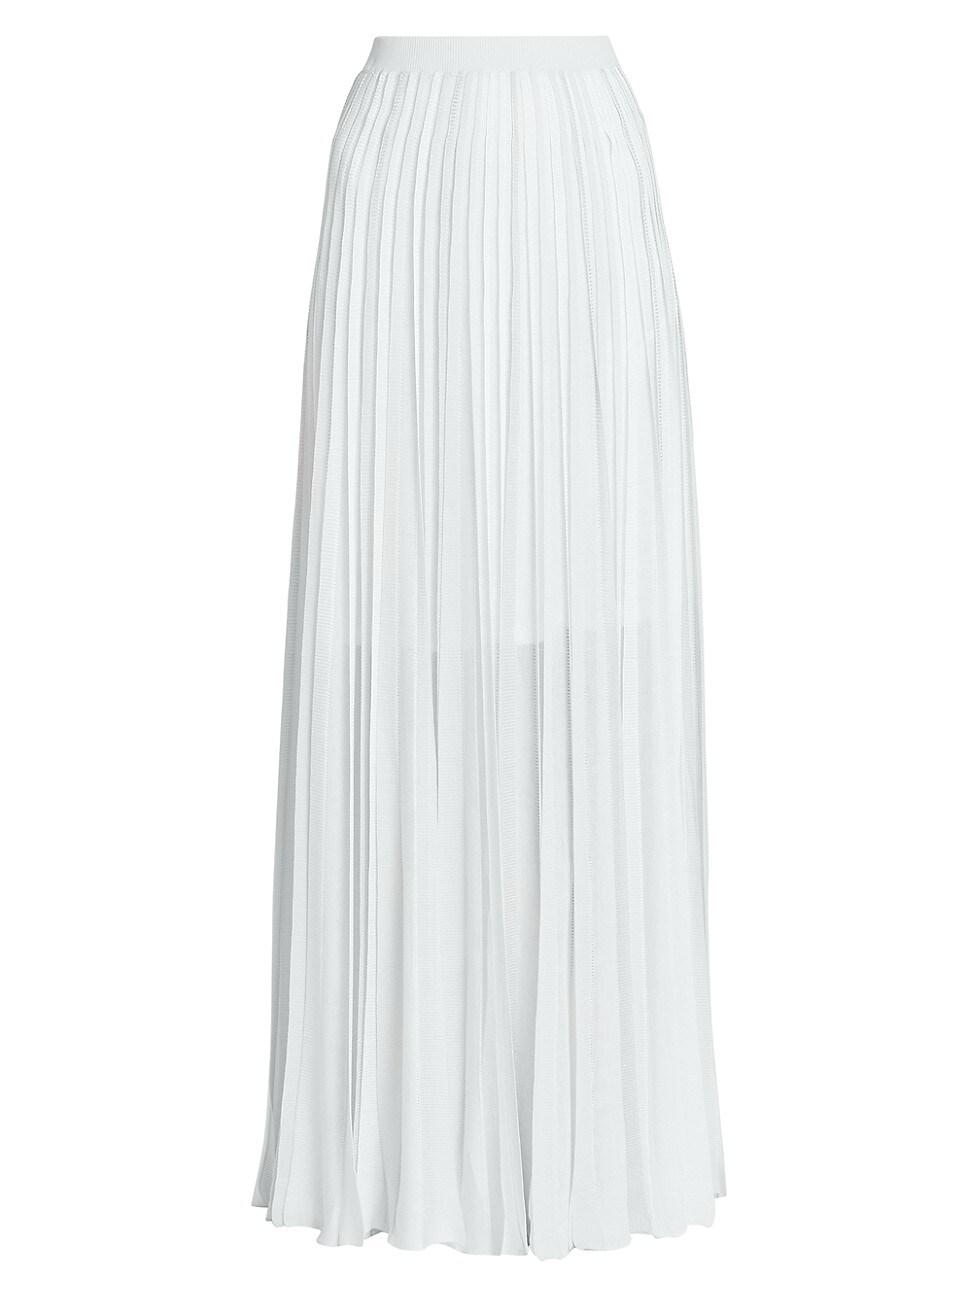 Christopher Esber Entwined Ribbon Pleated Maxi Skirt in White | Lyst